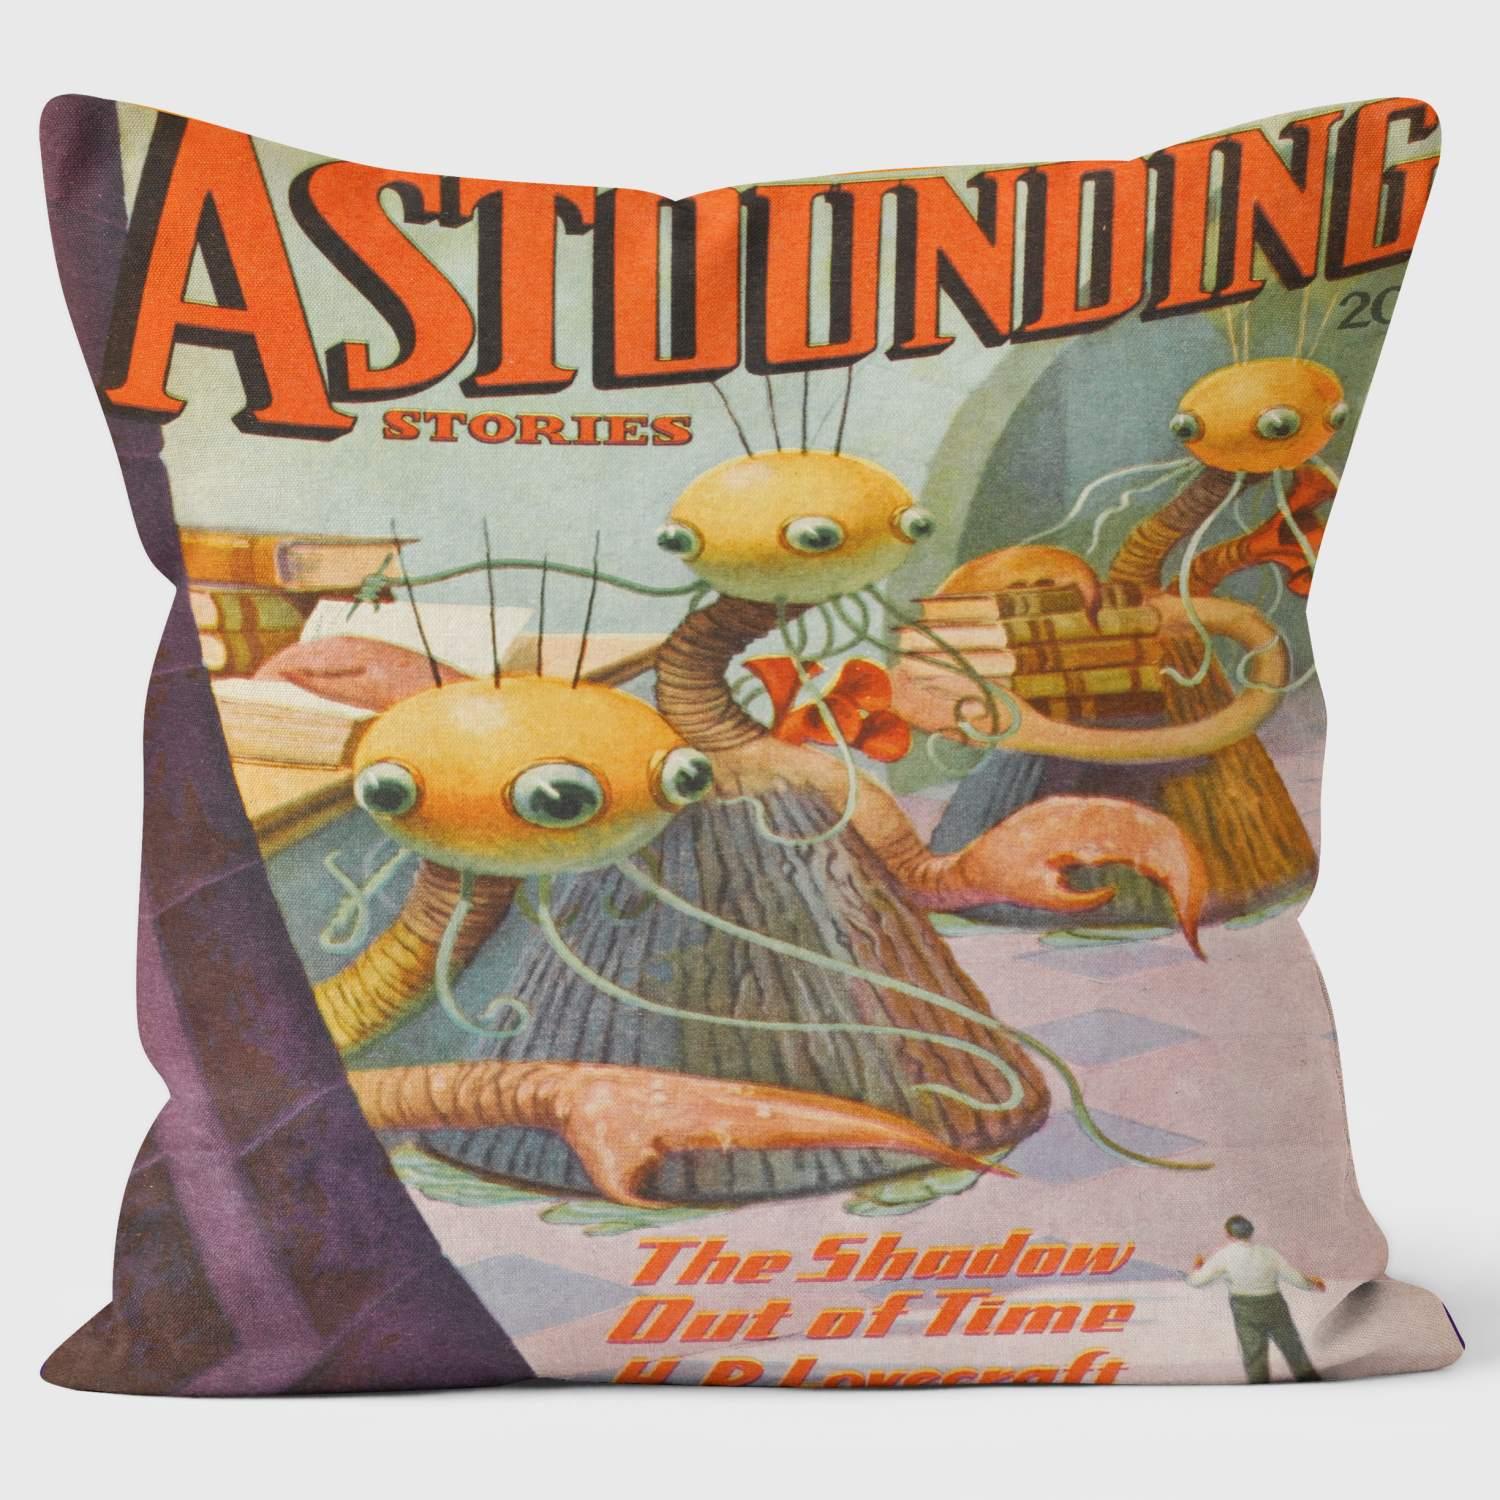 Astounding - Shadow Out of Time - Pulp Fiction Cushion - Handmade Cushions UK - WeLoveCushions